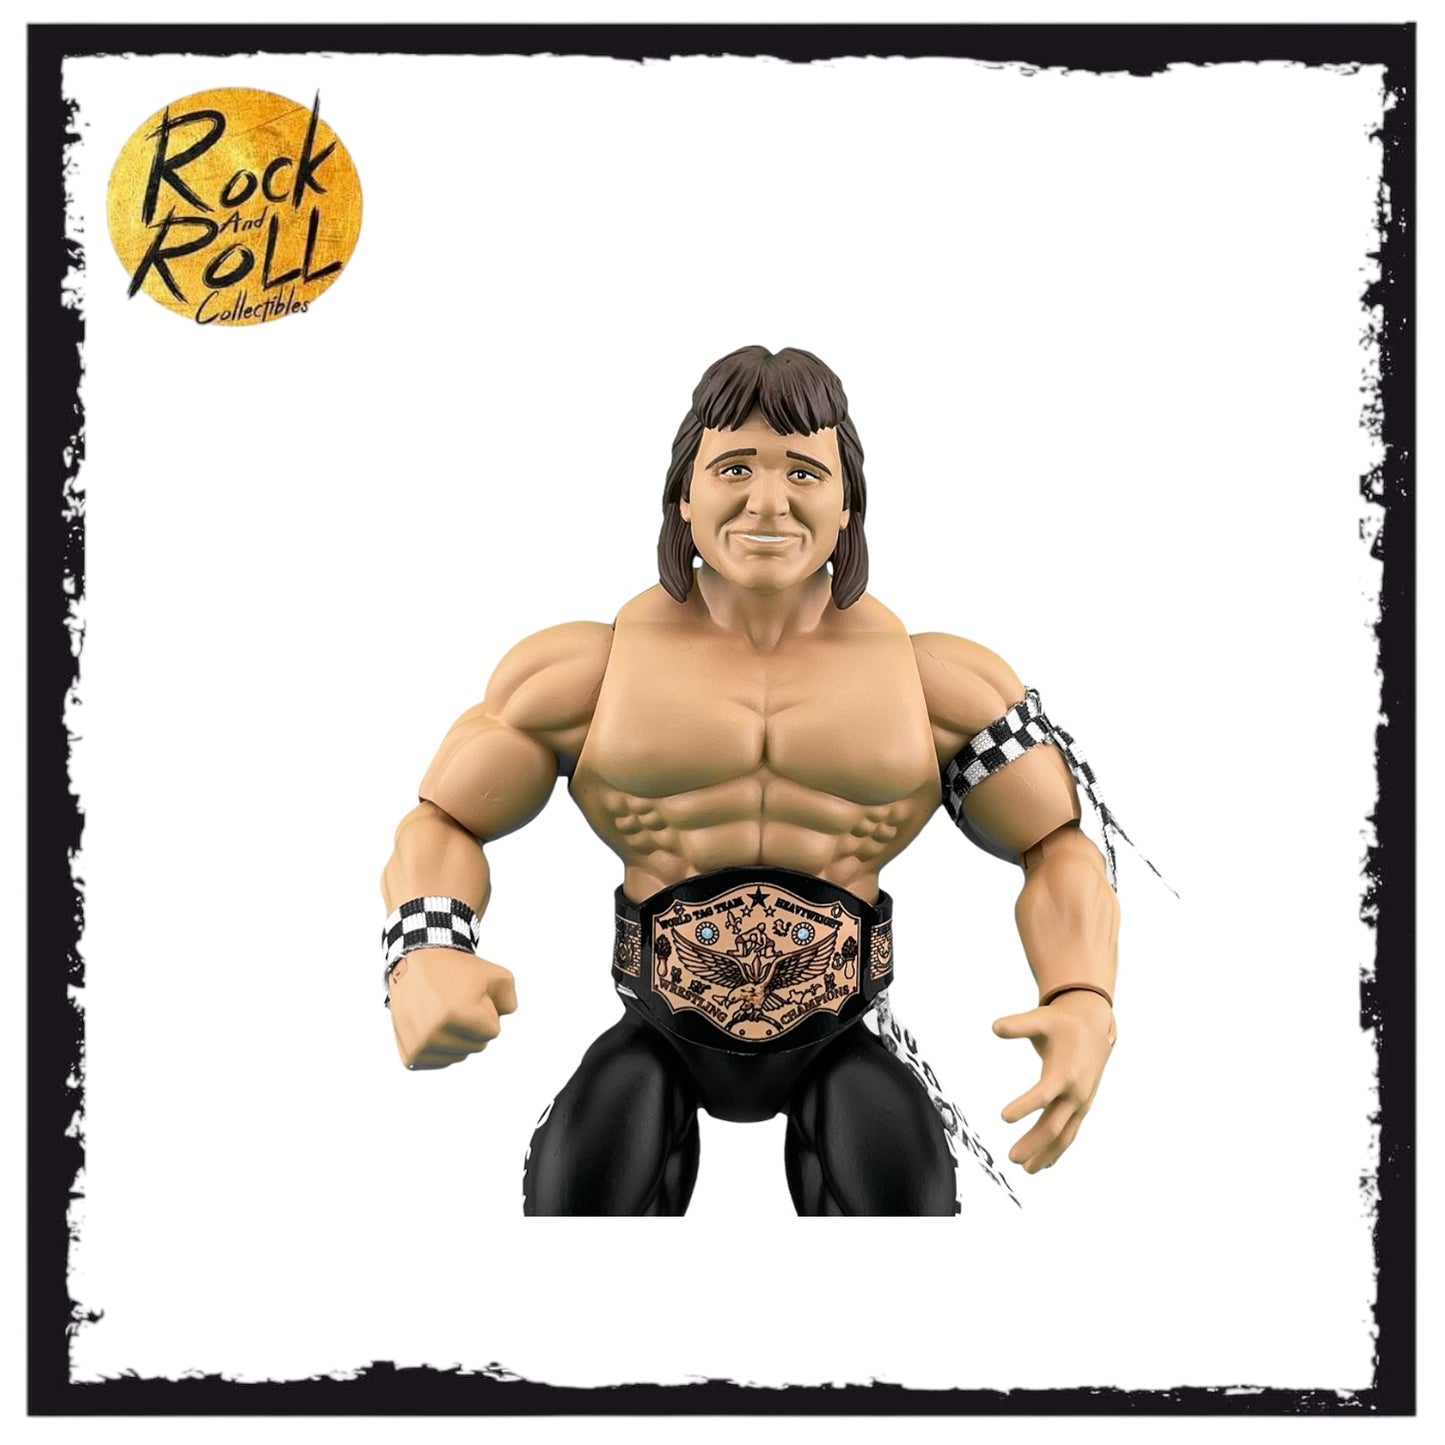 Rock ‘n’ Roll Express Ricky Morton And Robert Morton Remco PowerTown 2-Pack Pre Order